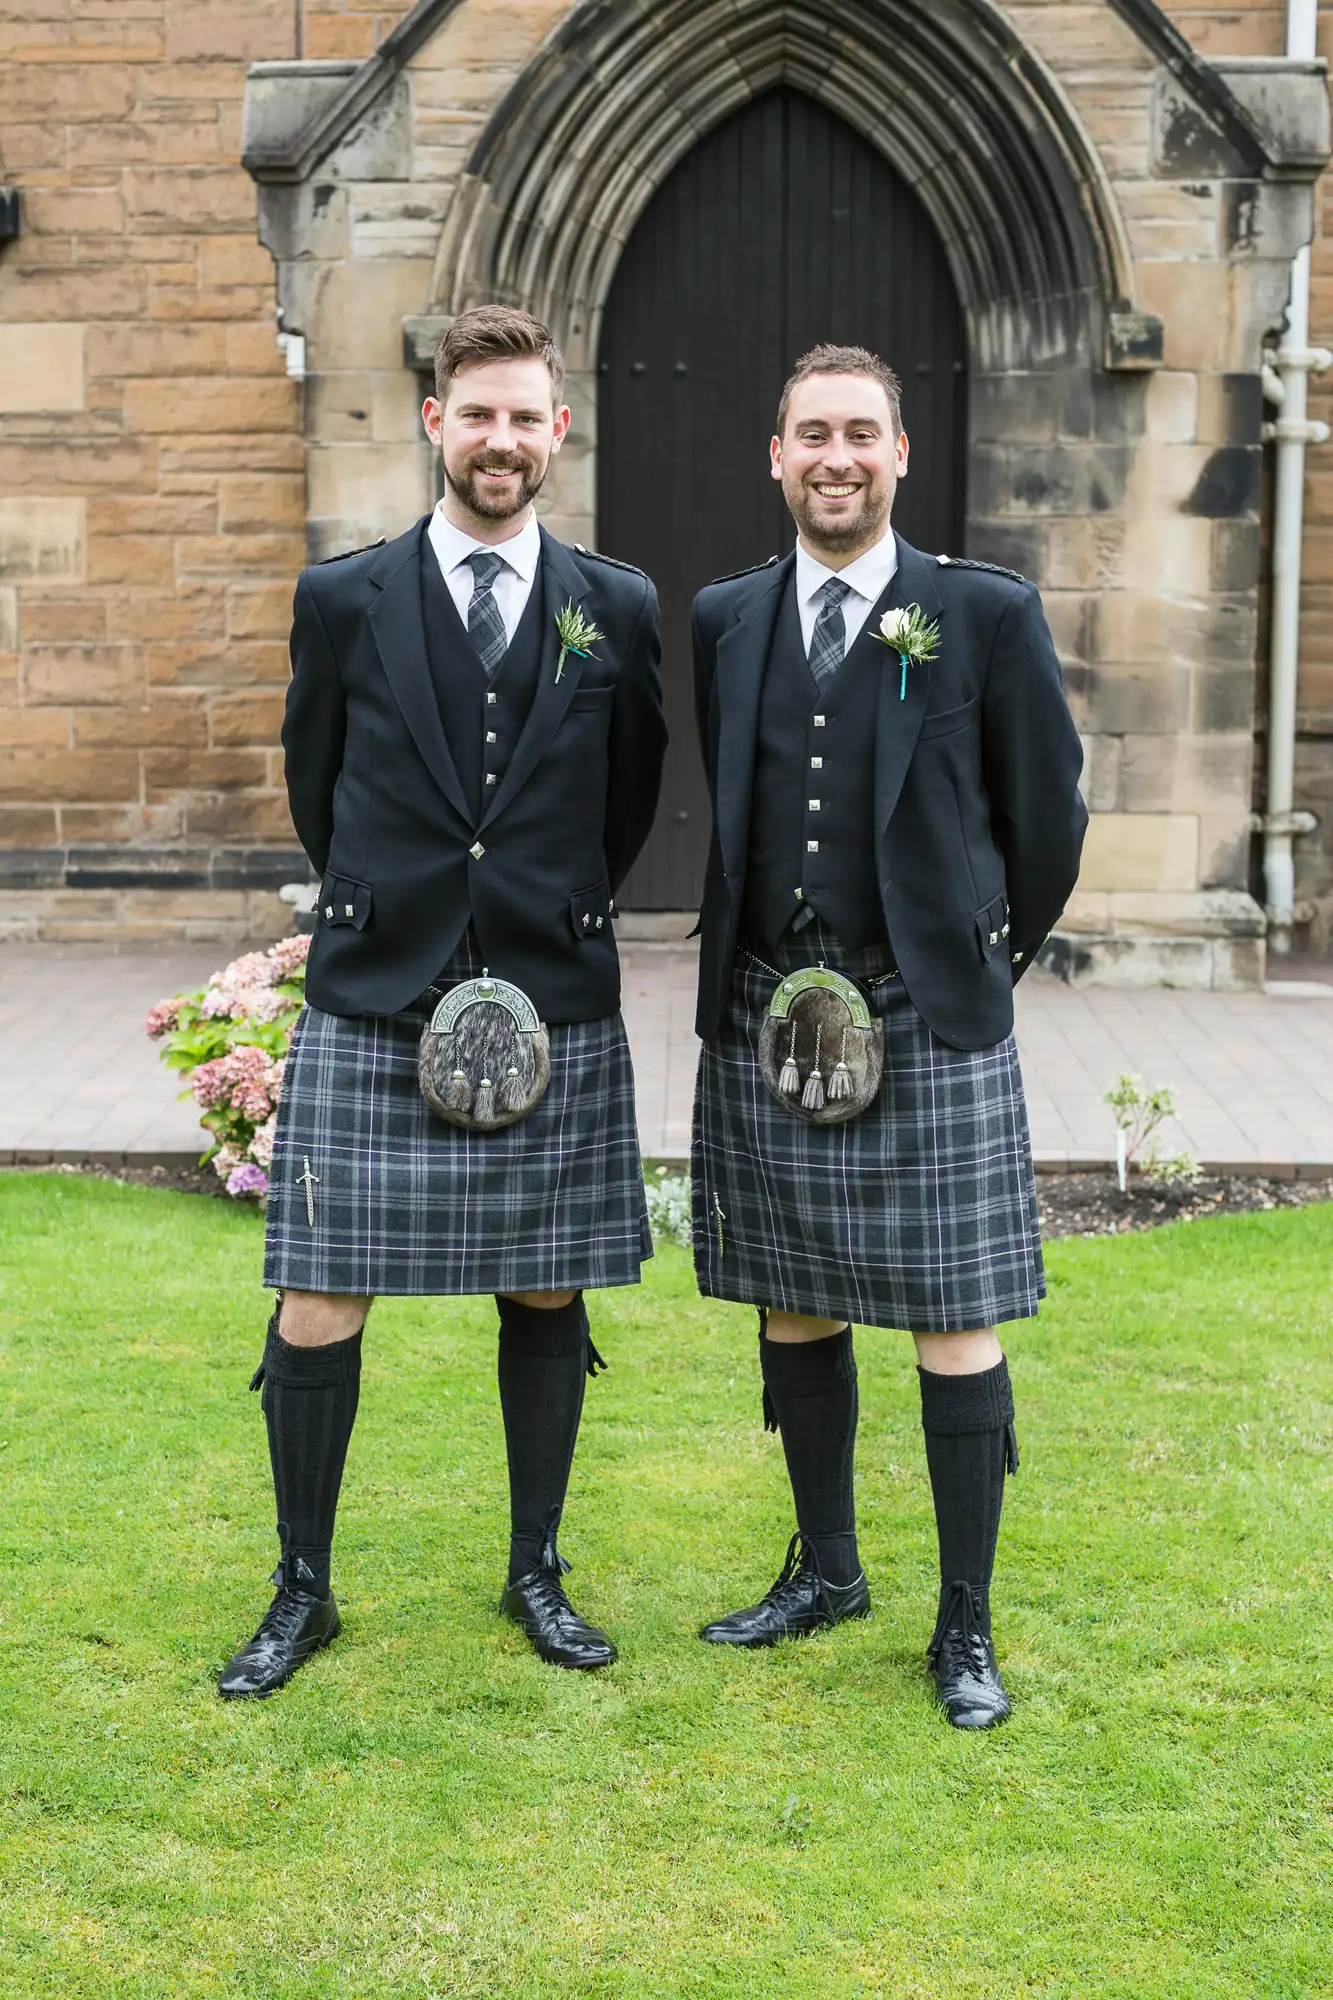 Two men in traditional scottish kilts and formal jackets smiling in front of a church entrance.